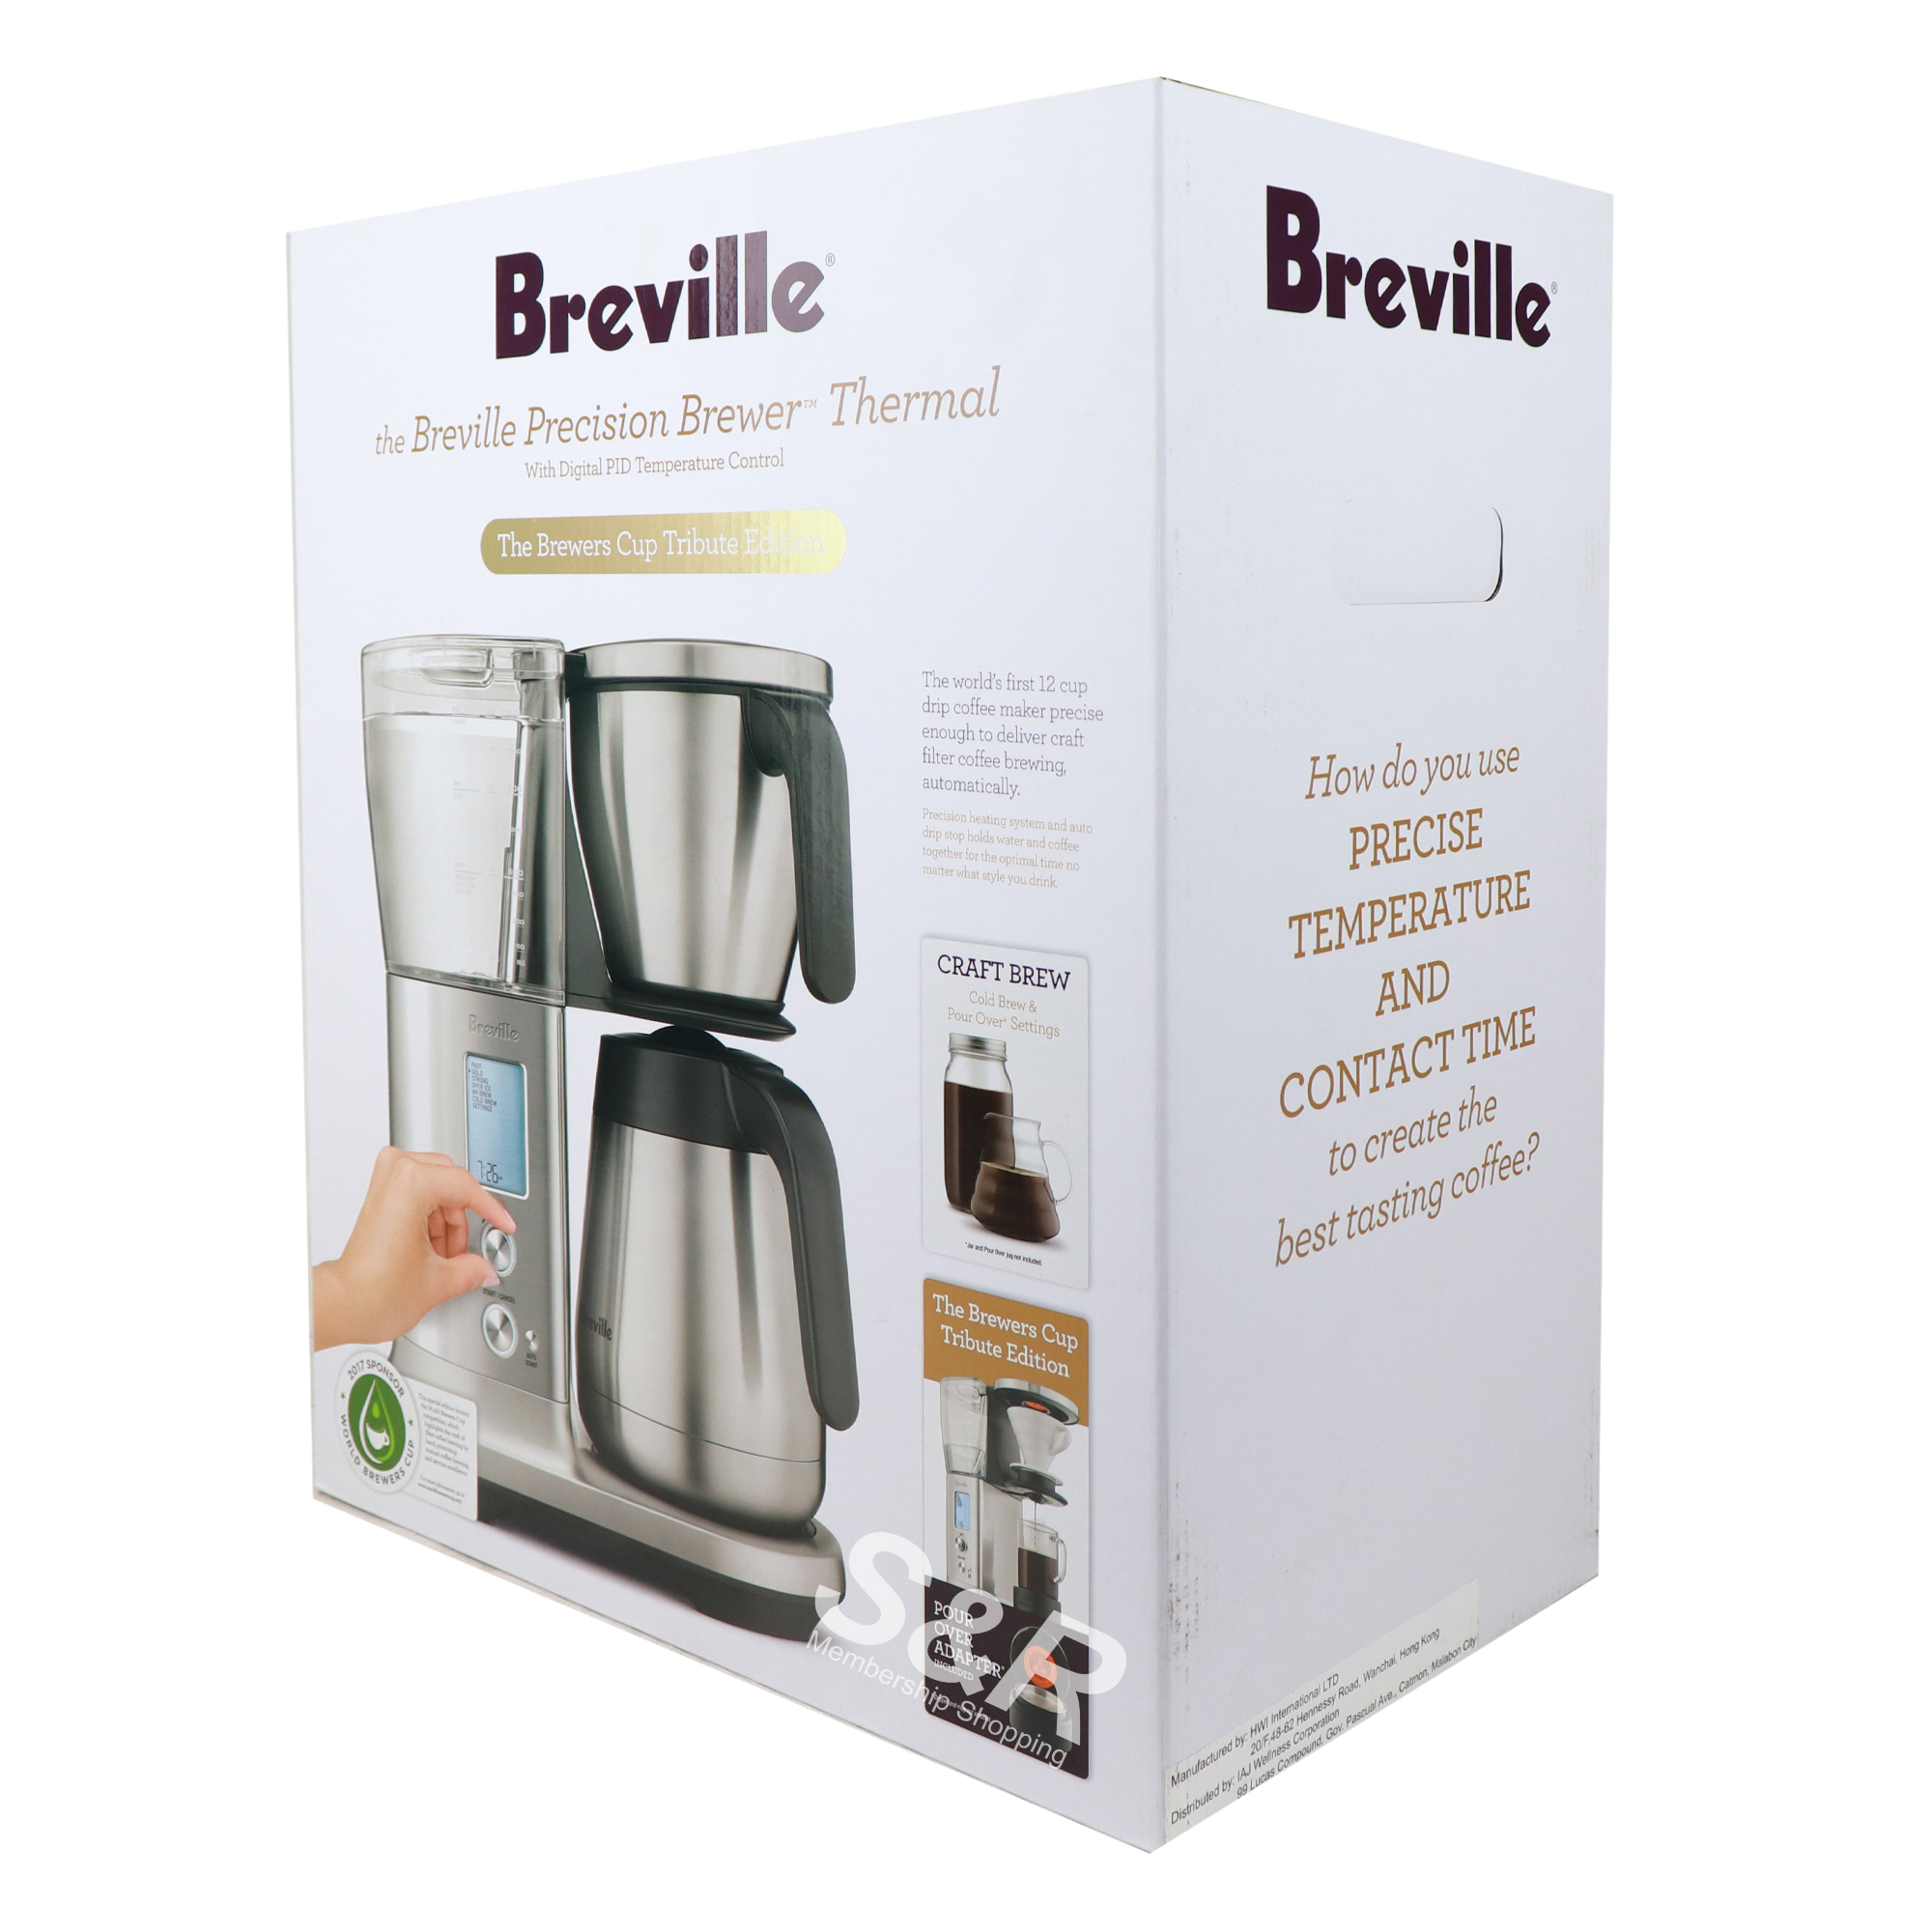 Precision Brewer Thermal